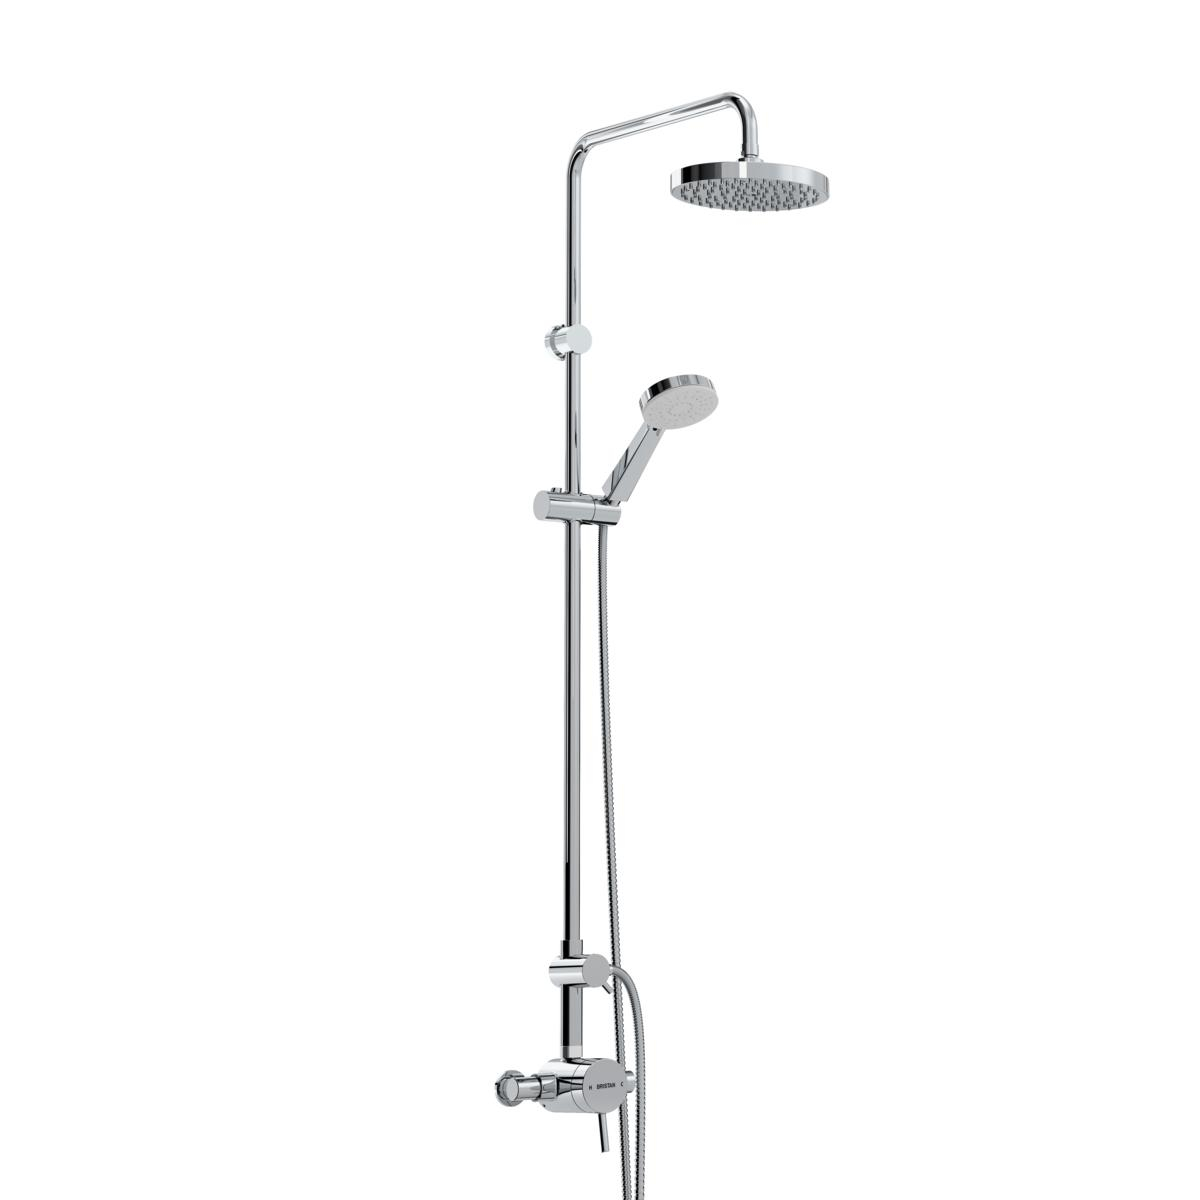 Bristan Prism Sequential Fixed Head Exposed Mixer Shower with Shower Kit in  Chrome - PM2 SQSHXDIV C